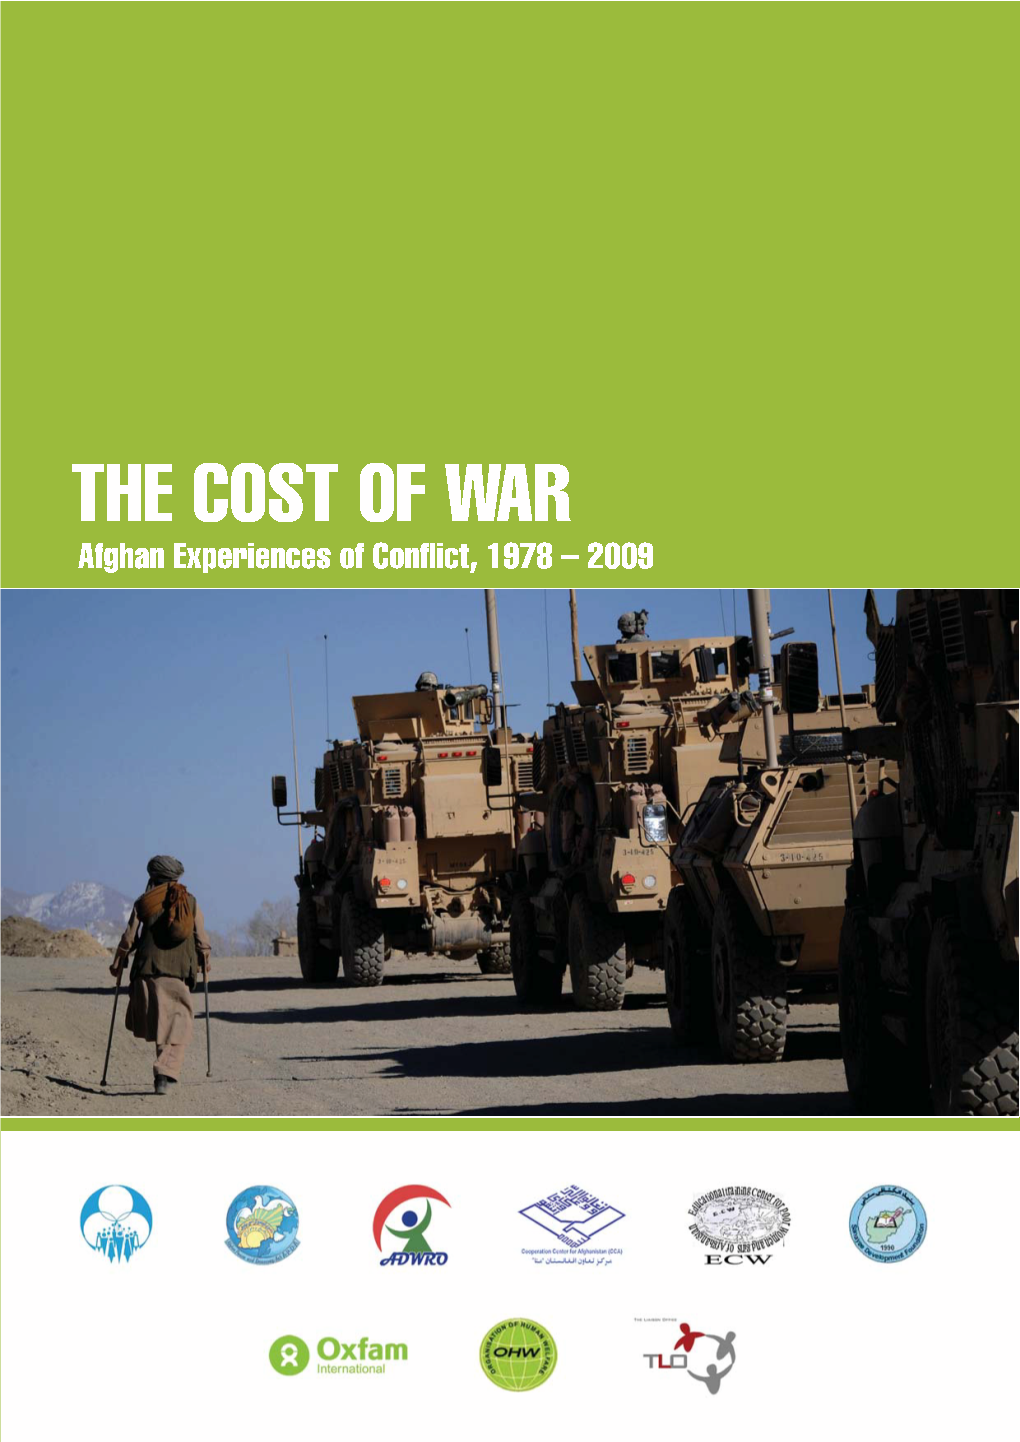 The Cost of War: Afghan Experiences of Conflict, 1978